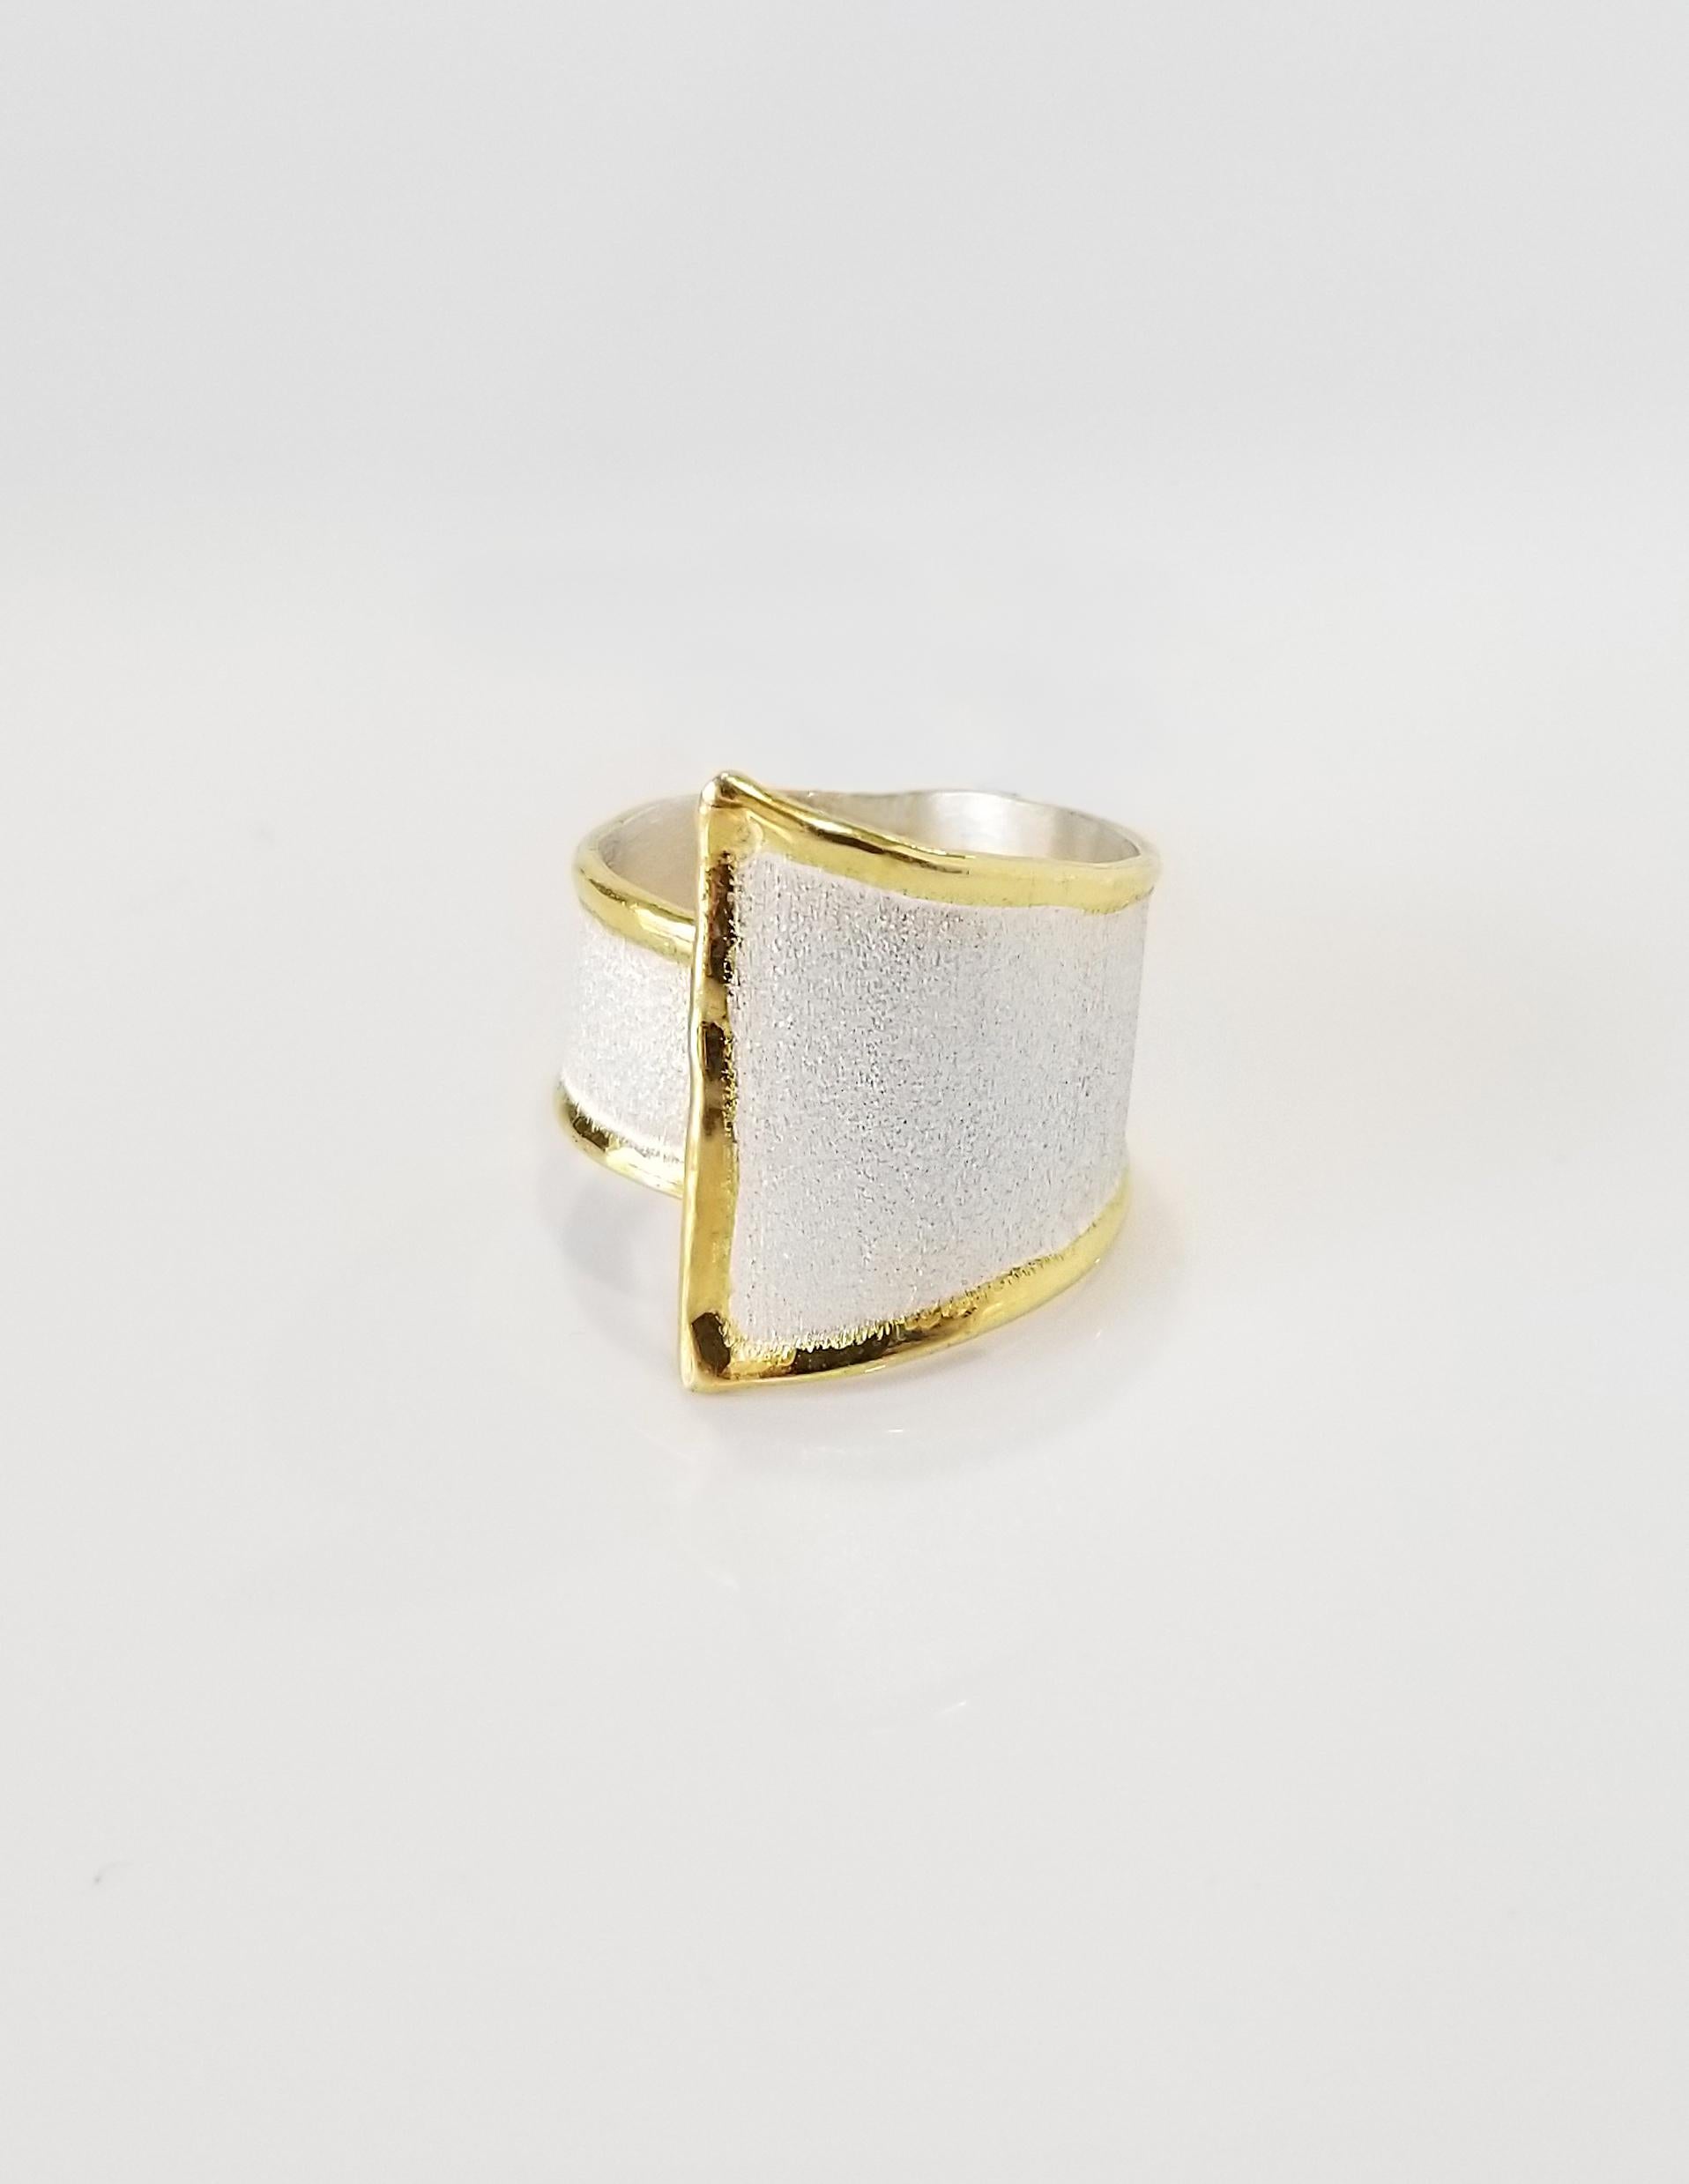 Yianni Creations Fine Silver and Gold Adjustable Wide Two-Tone Band Ring In New Condition For Sale In Astoria, NY